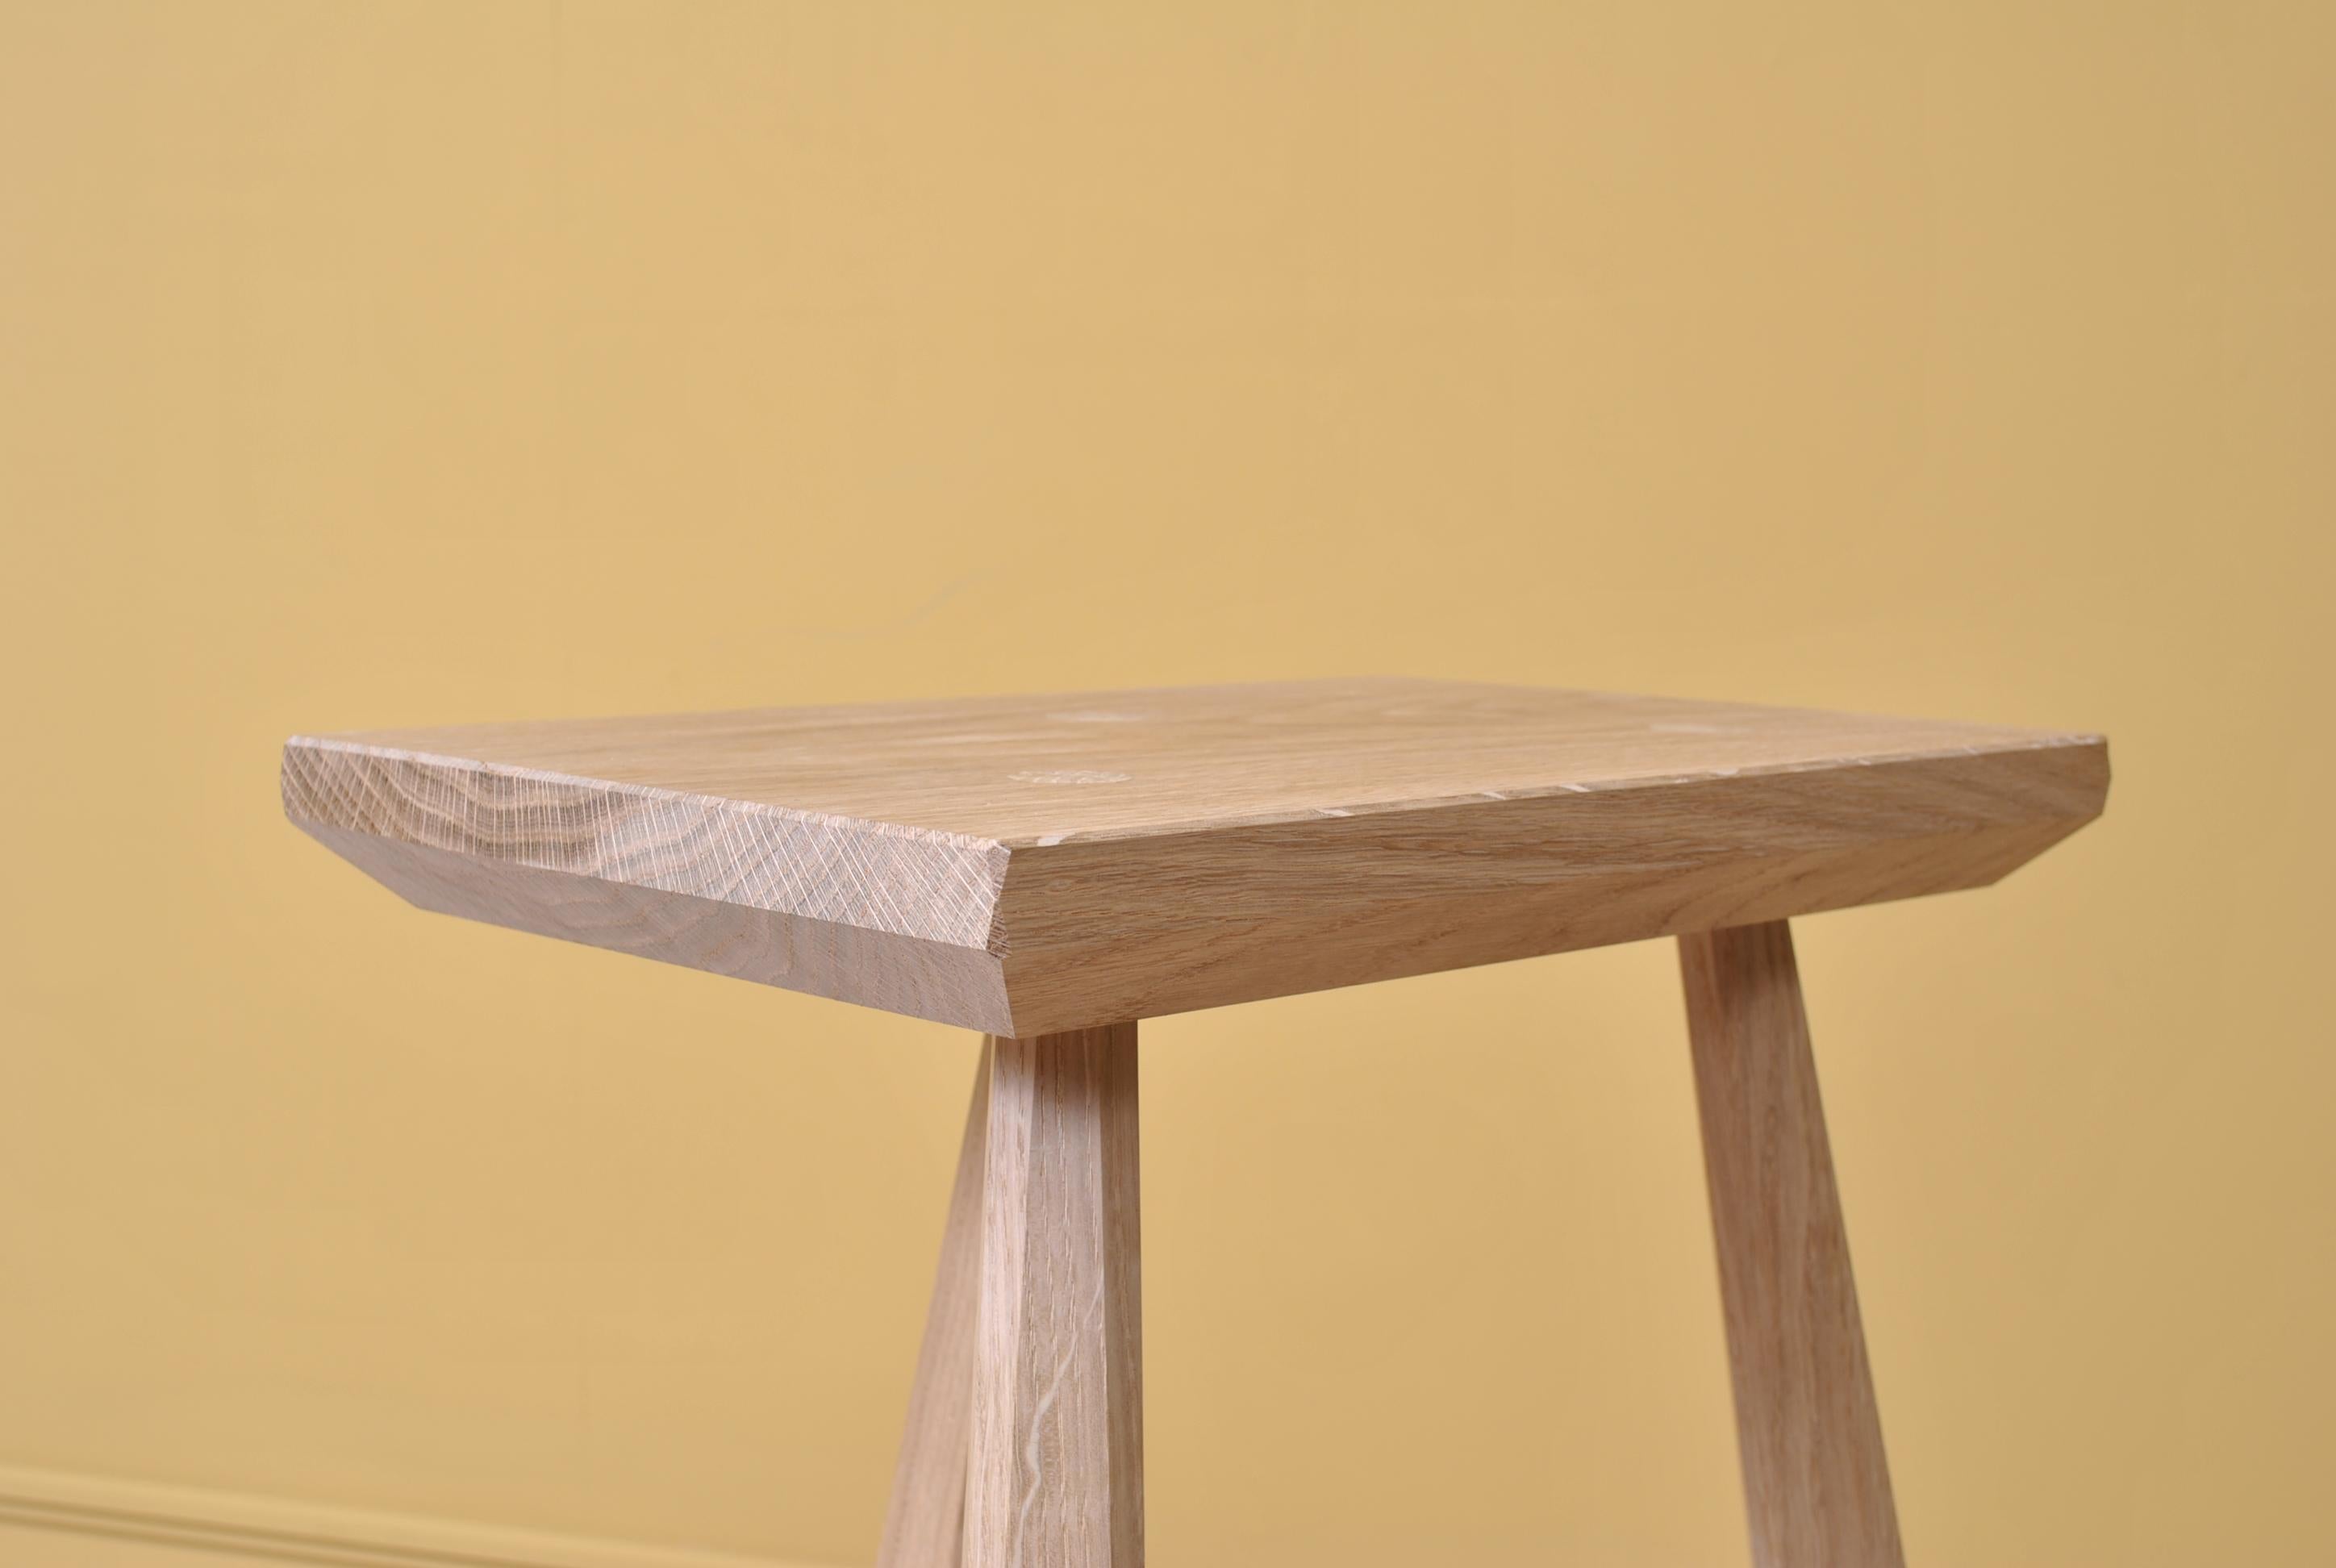 A handmade traditional staked legged milking stool by London duo Bibbings & Hensby. This example is in raw oak but other timbers and finishes are available.
Much of Bibbings & Hensby’s work is characterized by their predominant use of hand tools.